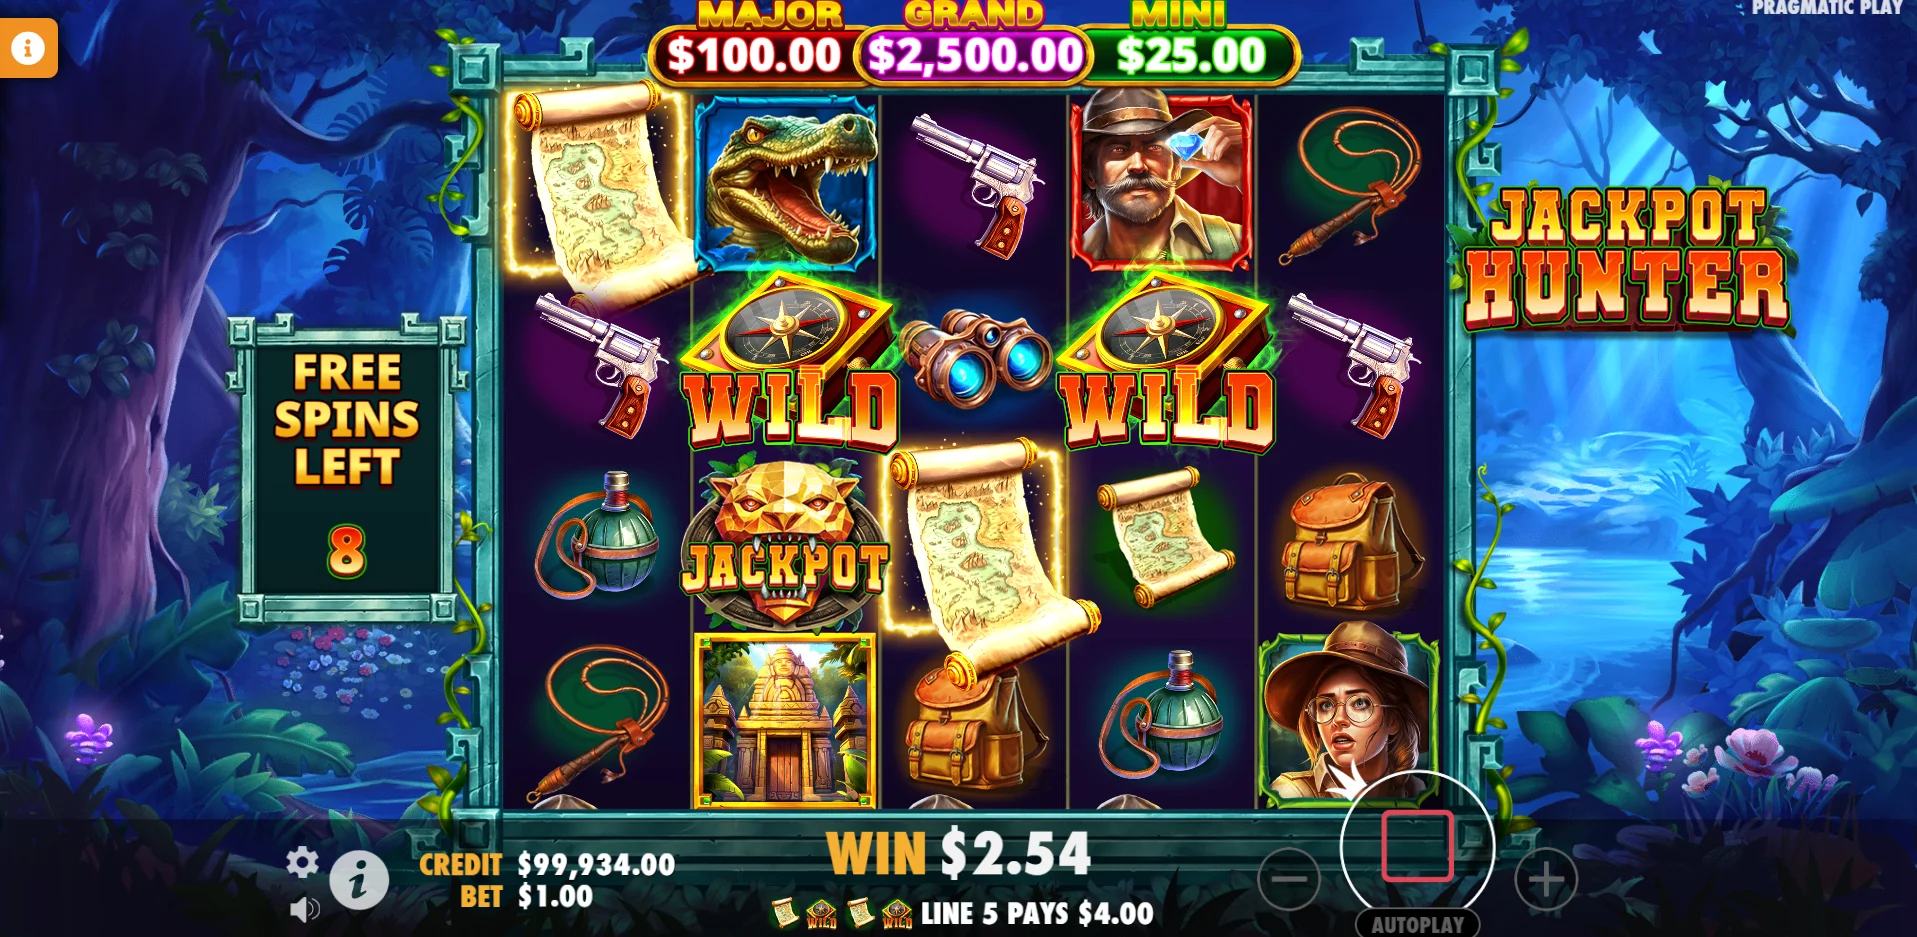 Land Jackpot symbols in Free Spins to win one of 3 Jackpot bonus prizes